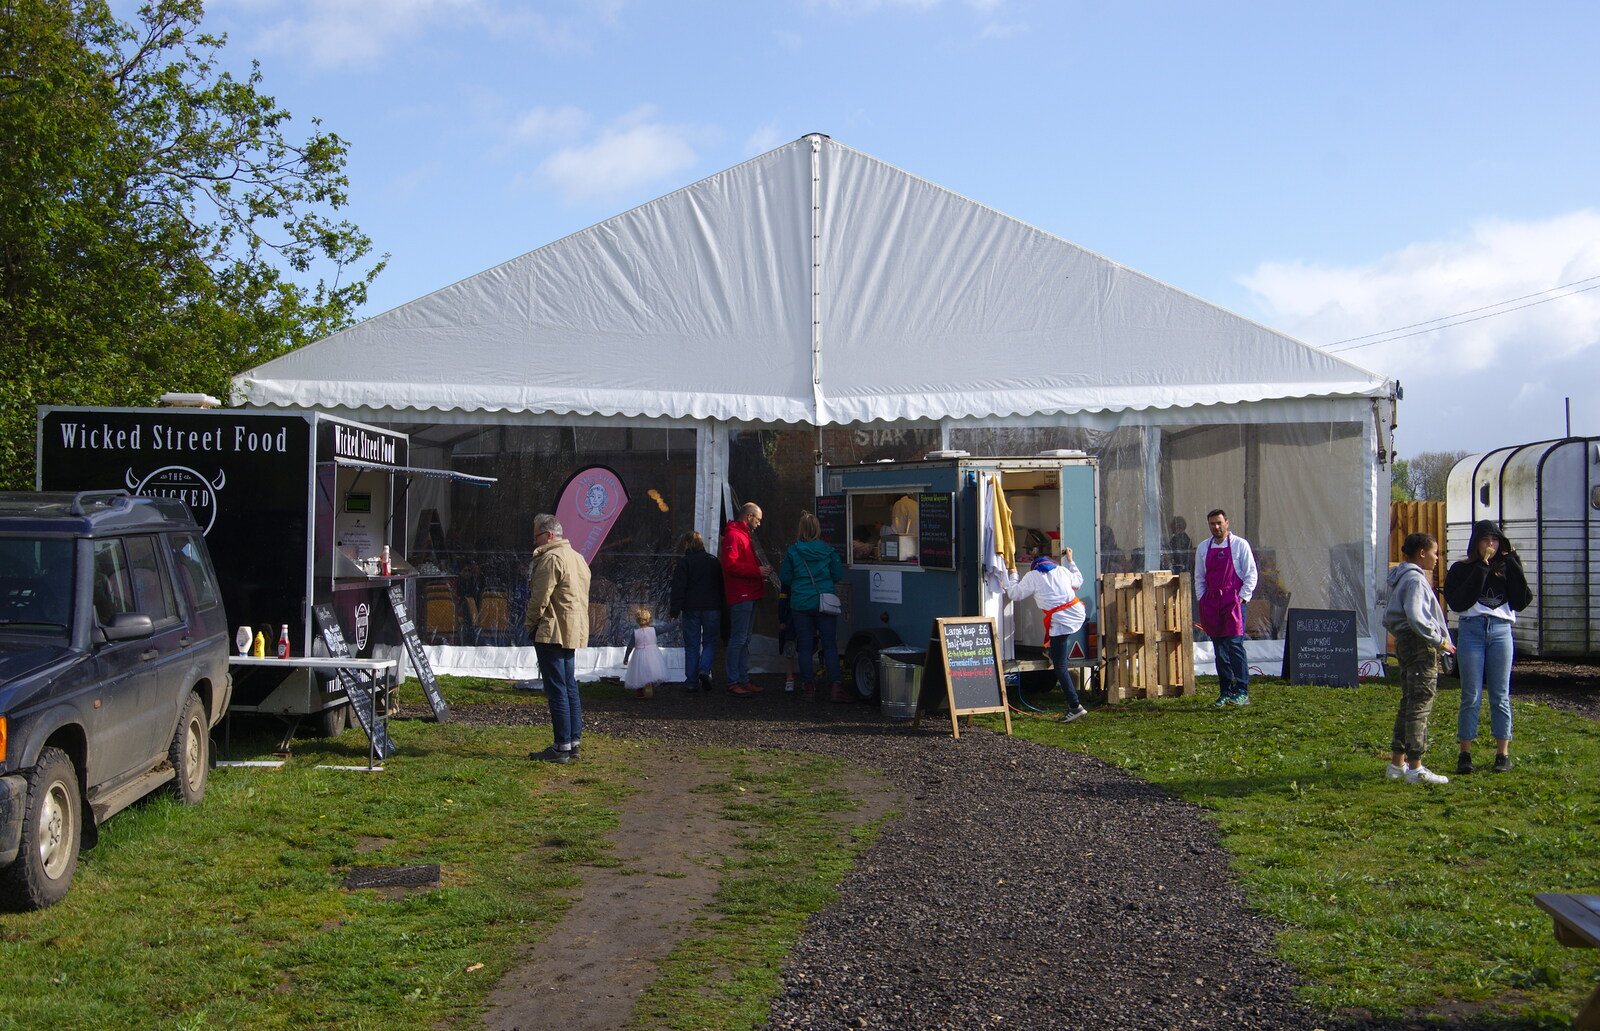 The marquee attached to the tap room from The Opening of Star Wing Brewery's Tap Room, Redgrave, Suffolk - 4th May 2019